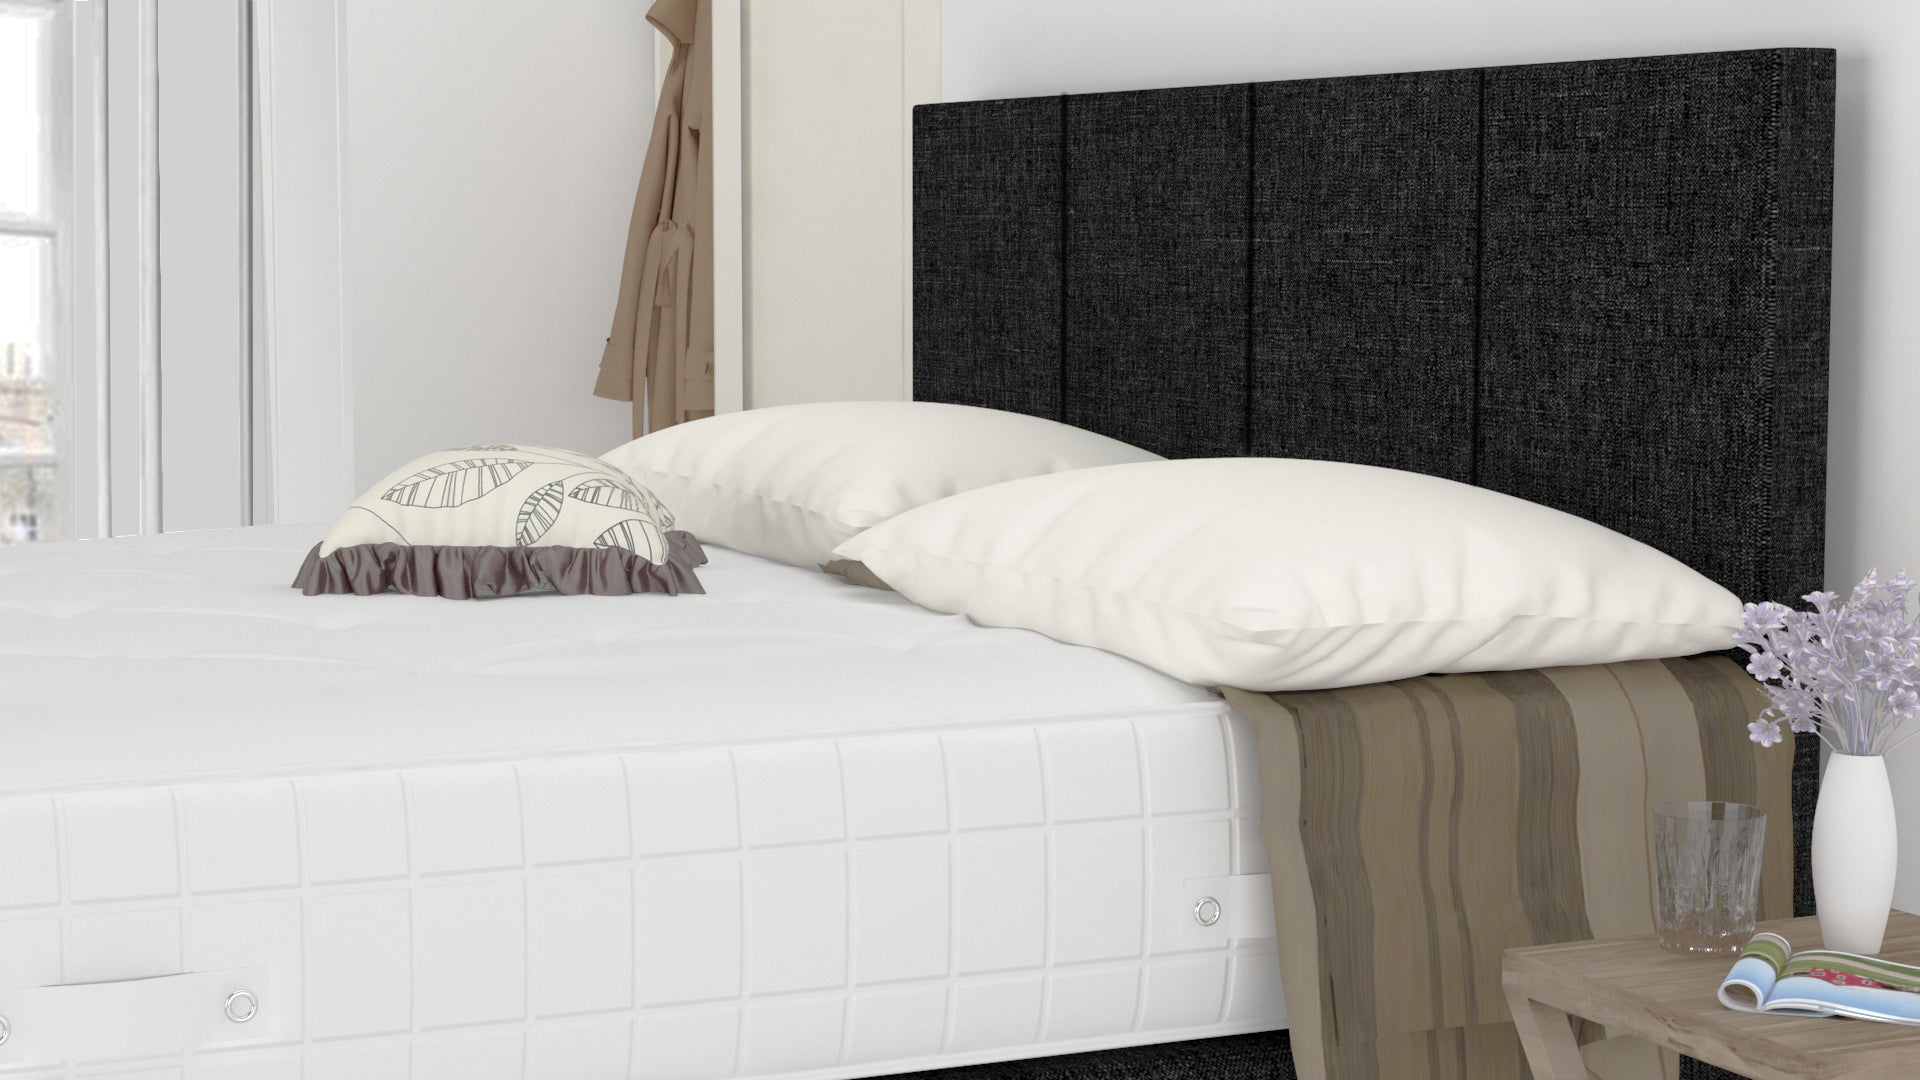 Black Venice 6 Feet Divan Bed Set With 4 Panel Headboard (Included Feet) And Free Tinsel Top Mattress